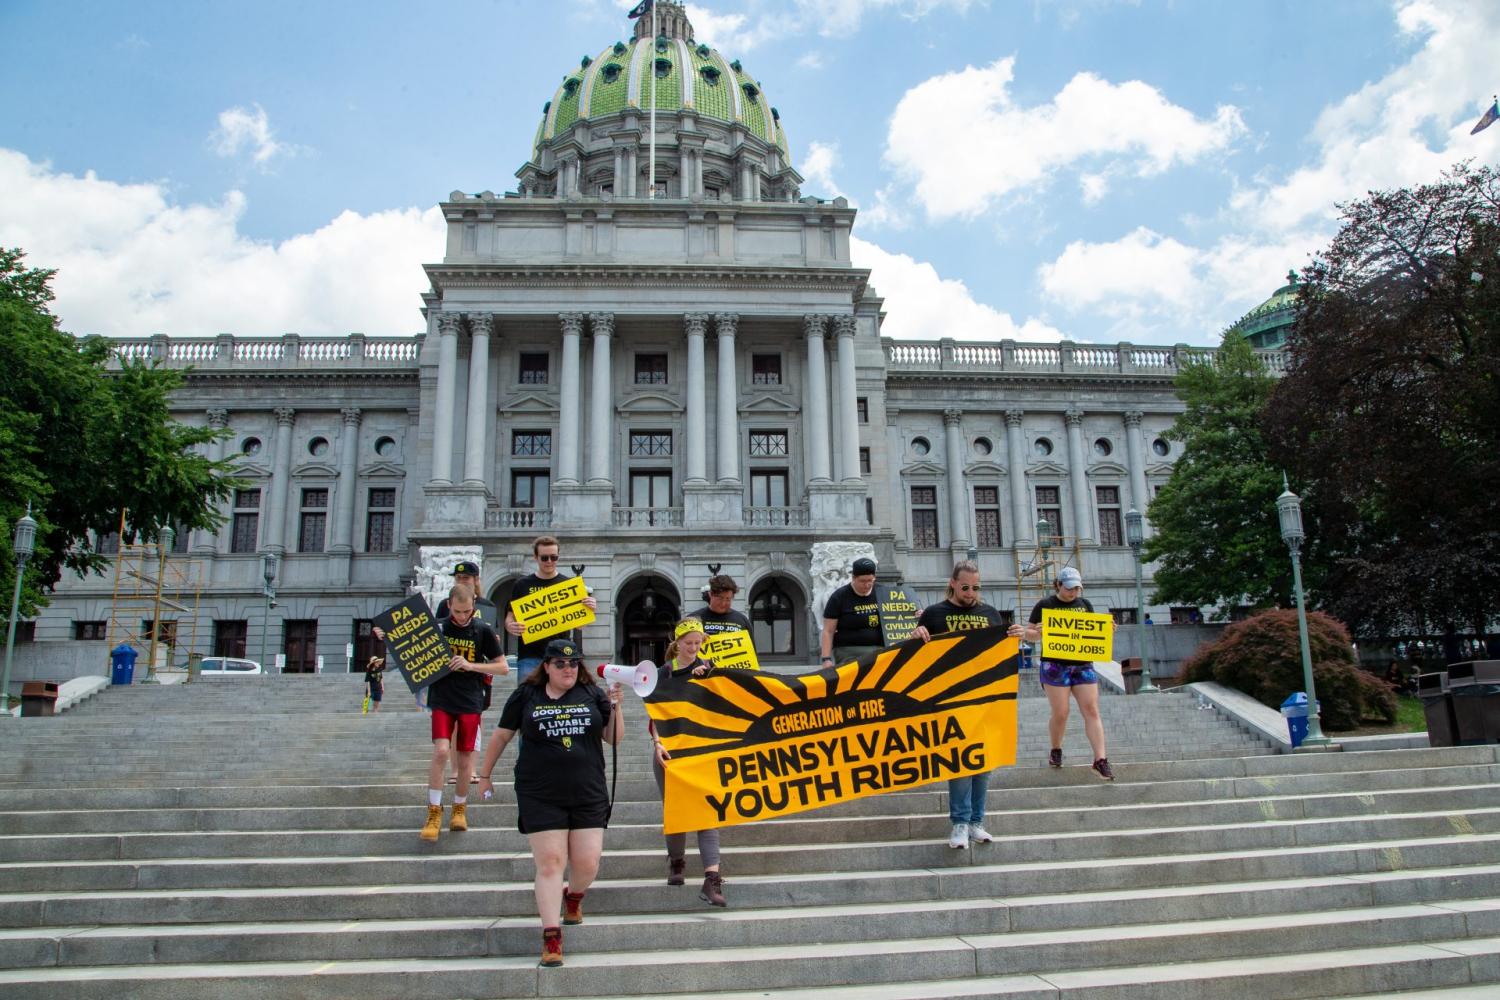 Sunrise Movement members rallied at the Pennsylvania State Capitol in Harrisburg, Pennsylvania on June 21, 2021. The rally launched a 105-mile, week-long trek to Washington, DC where they will meet up with other Sunrise groups and deliver demands to the Biden Administration and Congress. (Photo by Paul Weaver/Sipa USA)No Use Germany.